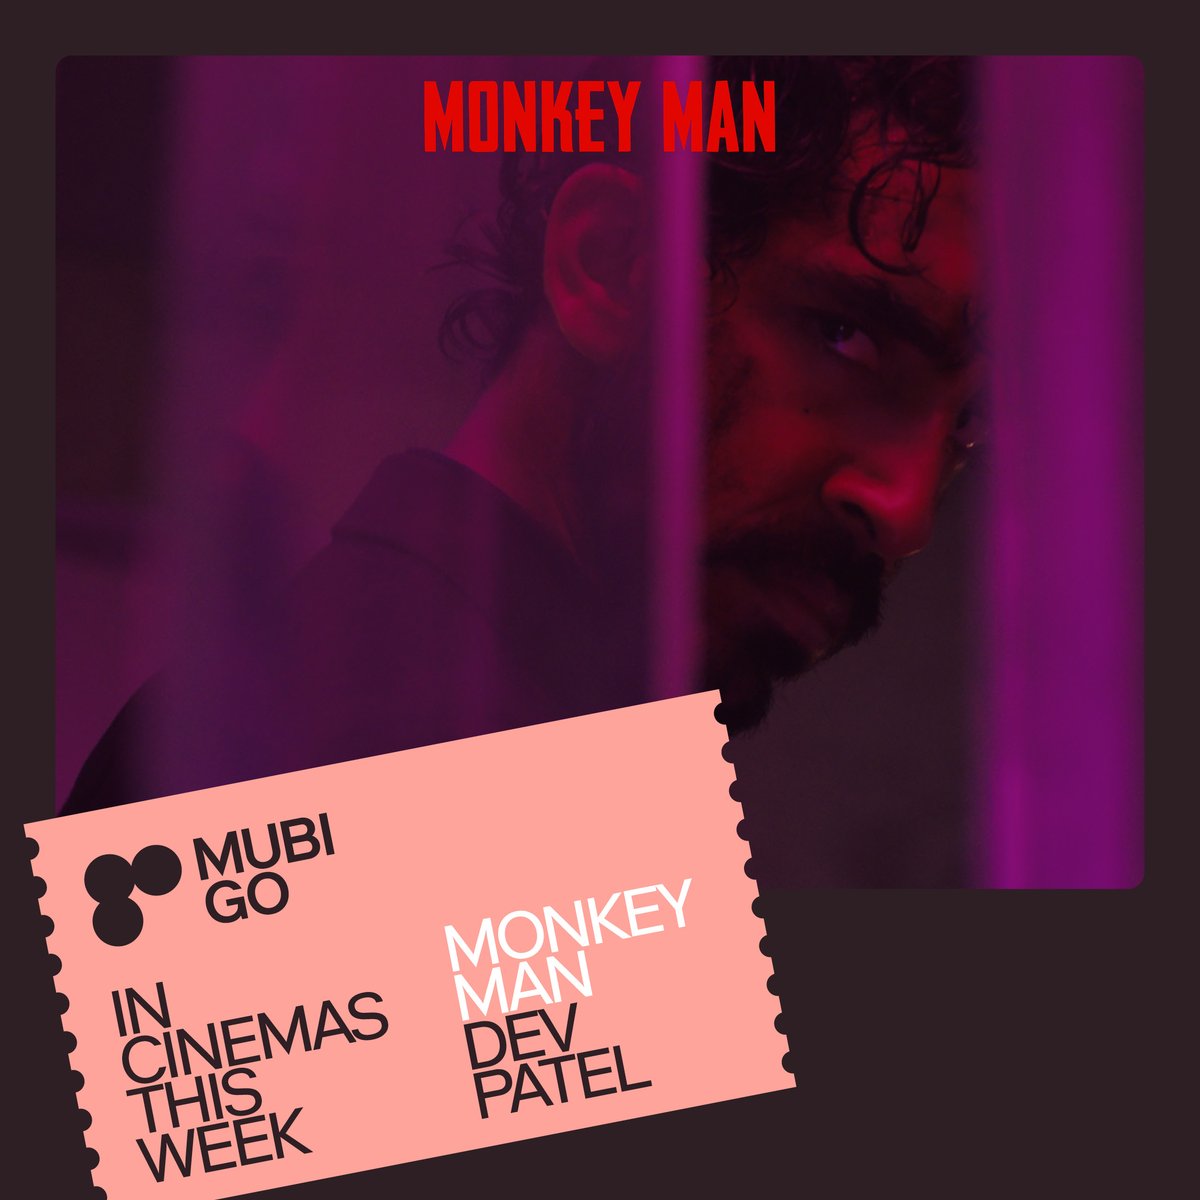 For his first outing in the director’s chair, the dashing Dev Patel flexes new artistic muscles as a bonafide action star in this blood-soaked, neon-lit vengeance tale. Watch MONKEY MAN in cinemas for free this week with MUBI GO. mubi.com/go